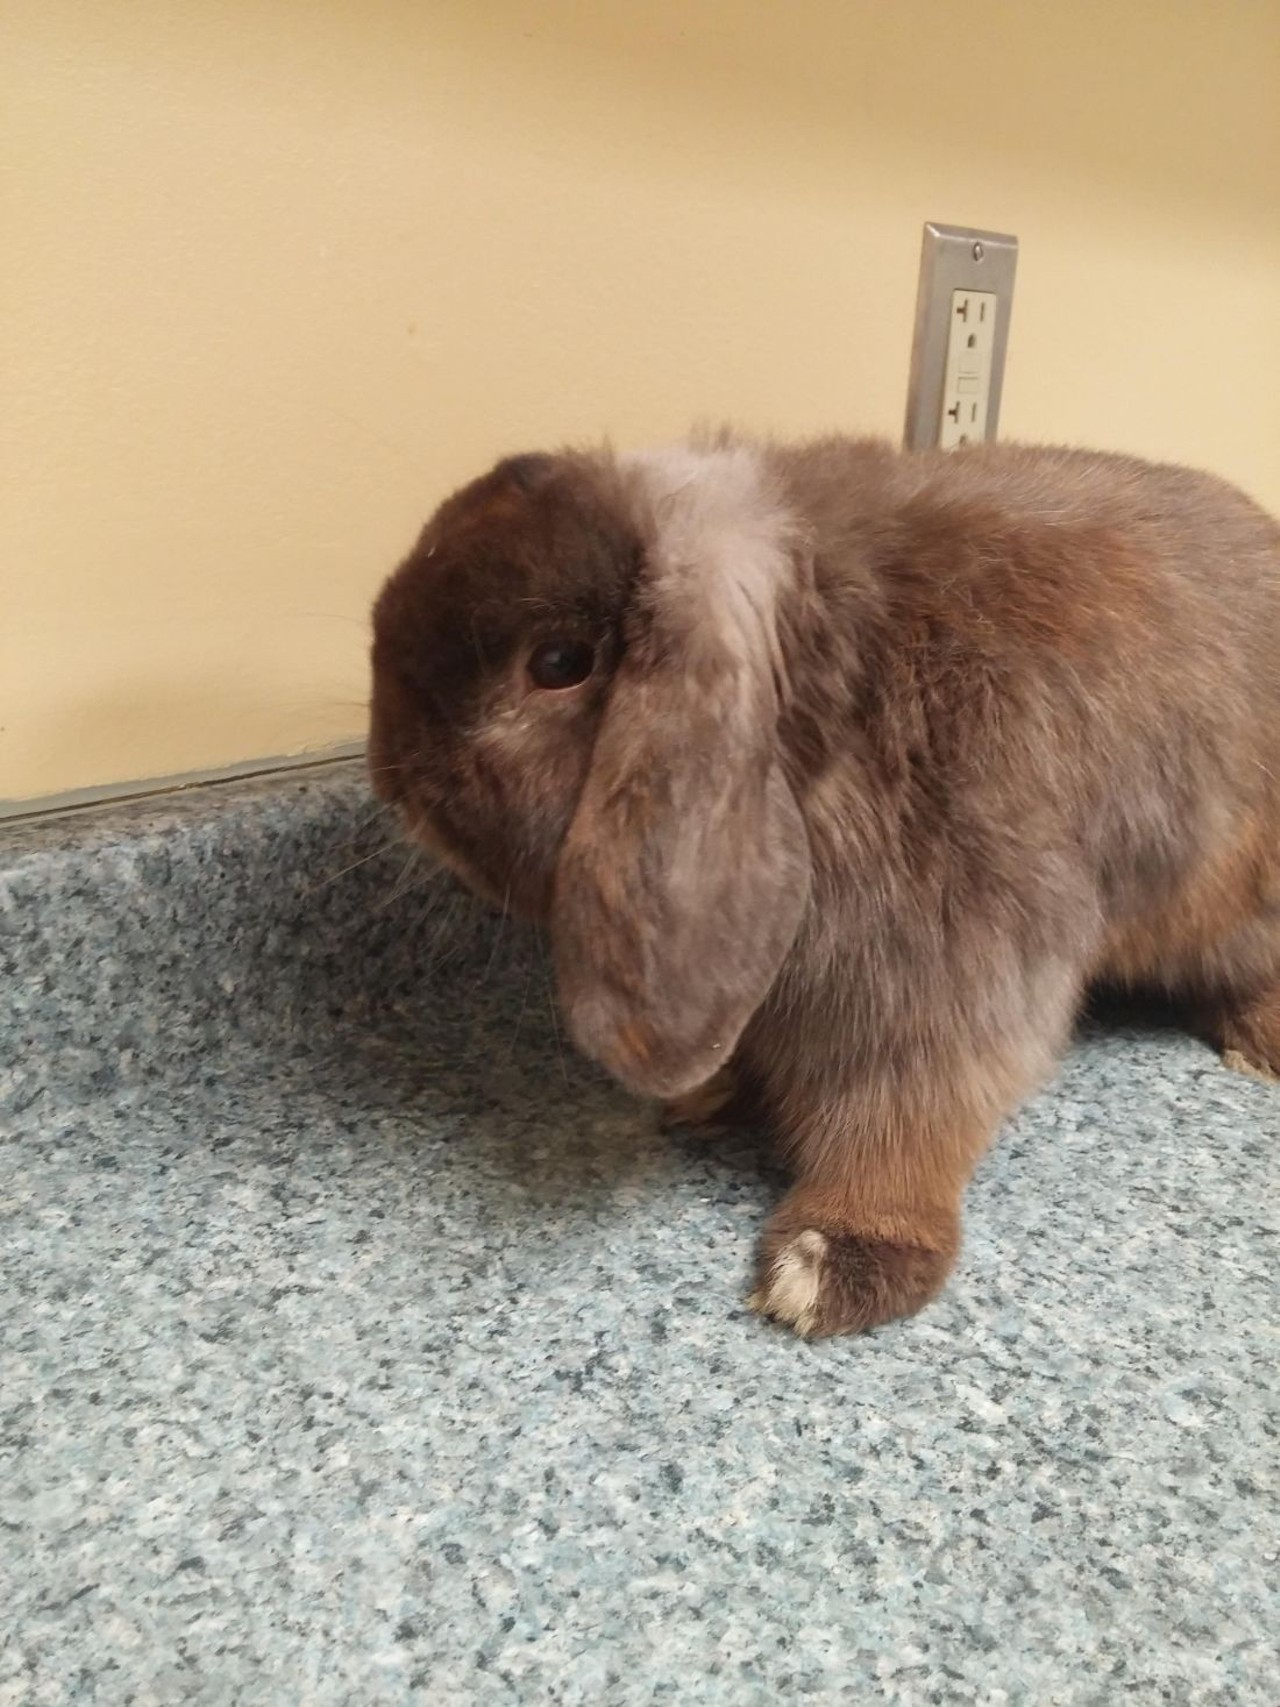 NAME: Cupid
GENDER: Male
BREED: Holland Lop-Harlequin mix
AGE: 3 years
WEIGHT: 4 pounds
SPECIAL CONSIDERATIONS: None
REASON I CAME TO MHS: Homeless in Livonia
LOCATION: Berman Center for Animal Care in Westland
ID NUMBER: 862637